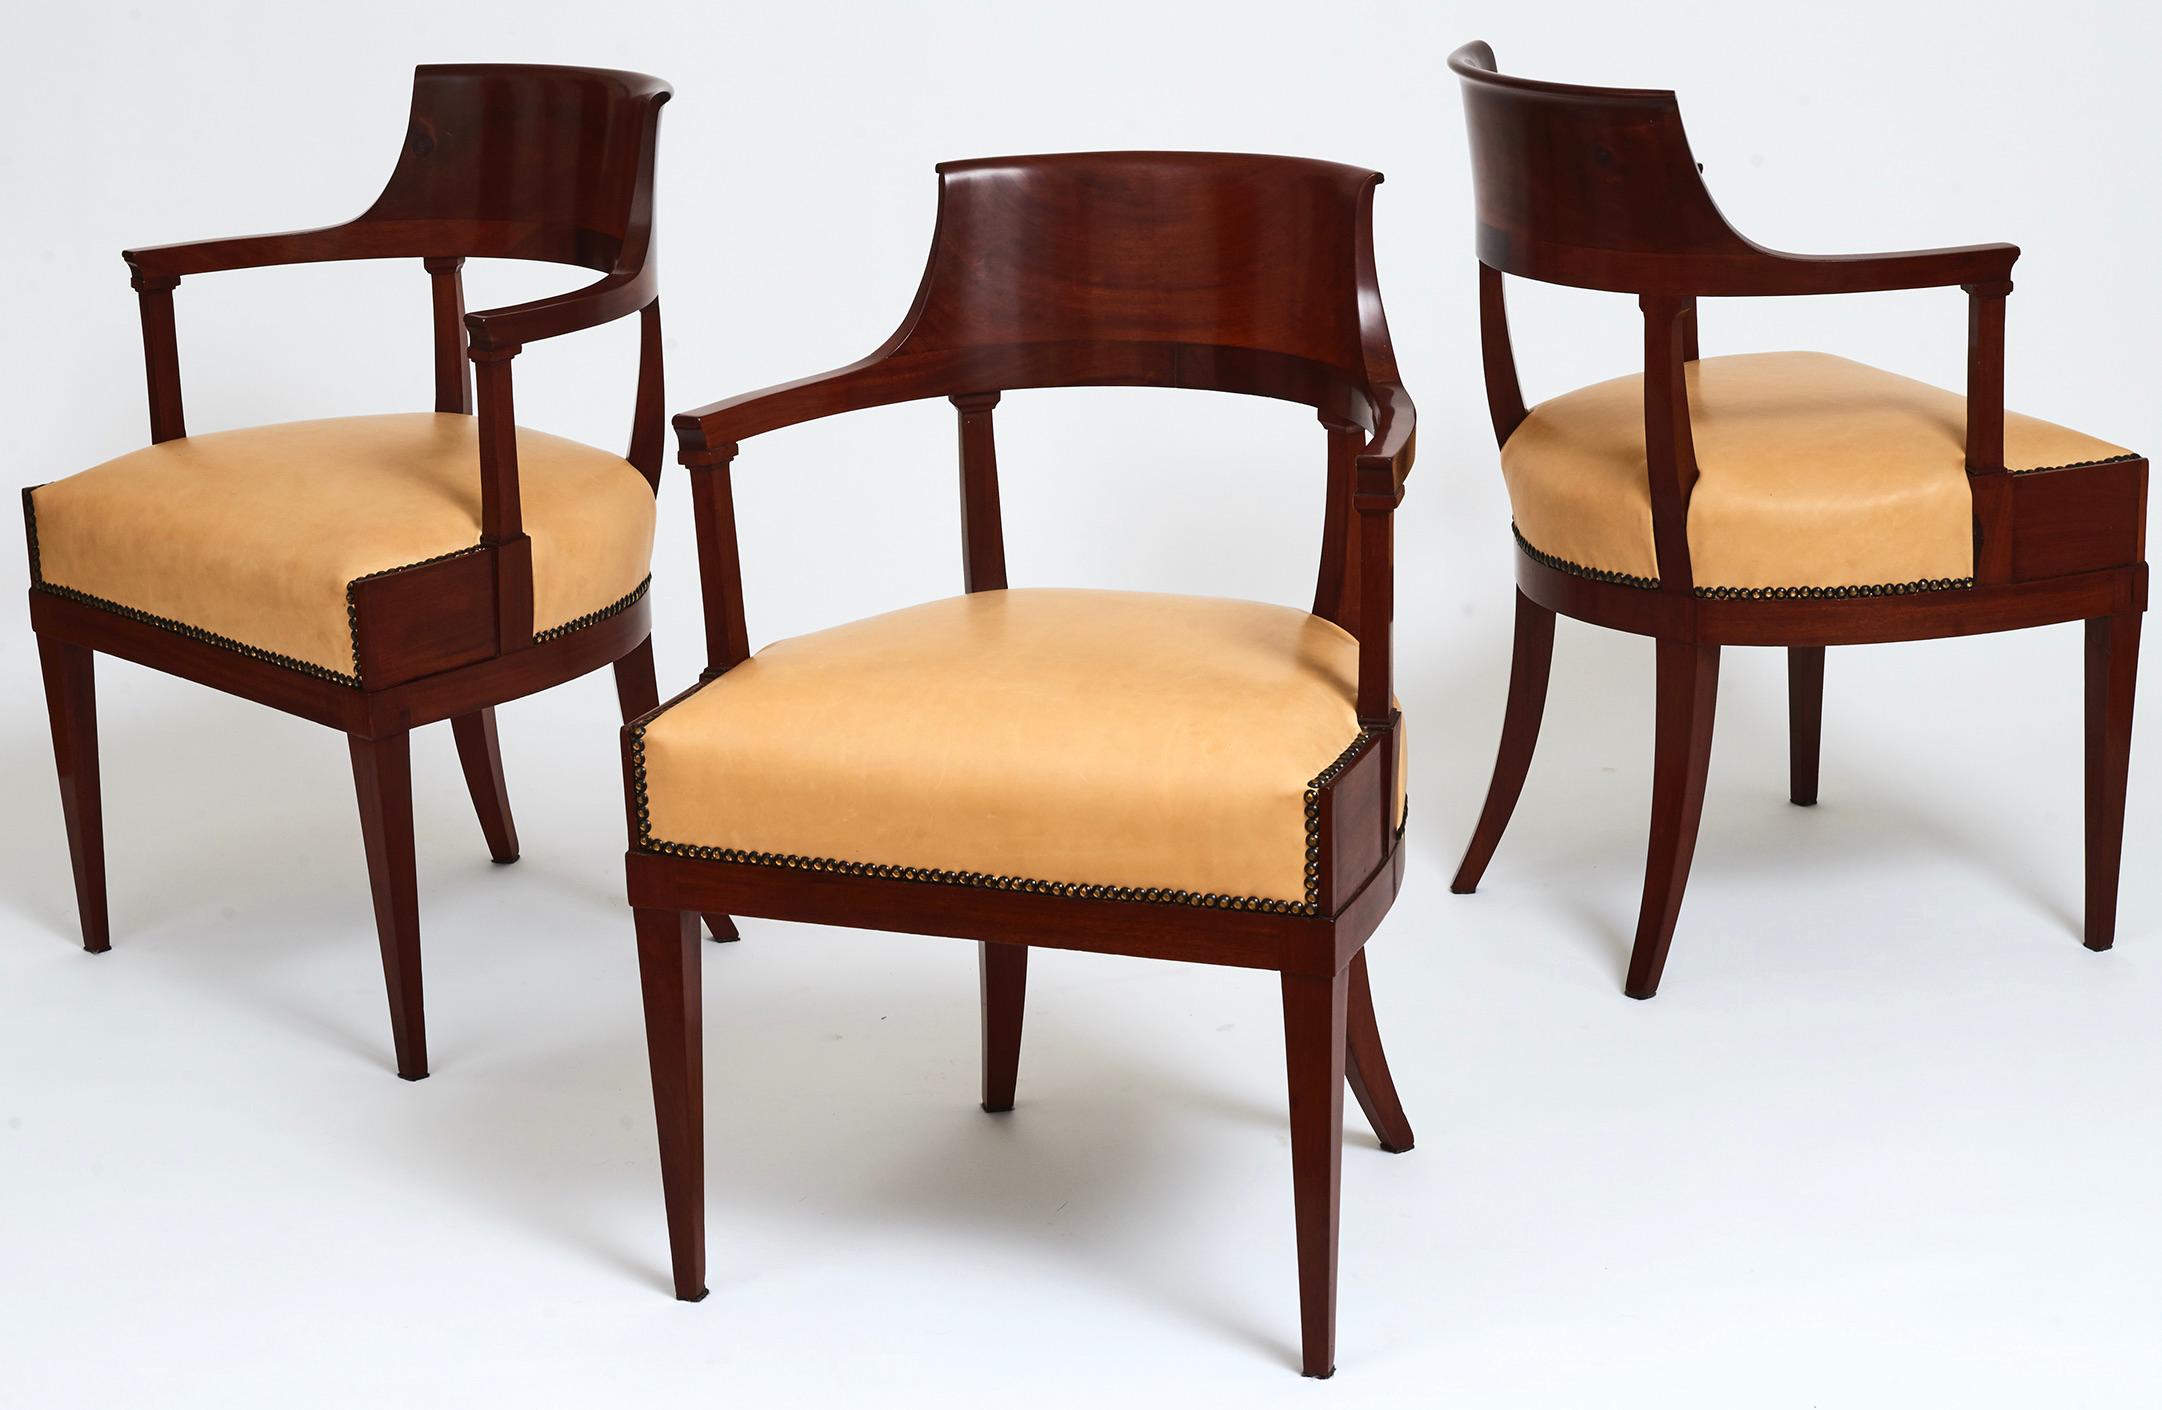 A set of three Swedish mahogany neoclassical open armchairs, first quarter of the 19th century, each with a scrolled and curved backrest, straight cut back armrests above a wide frieze and upholstered seat, on square tapering legs. Restored and